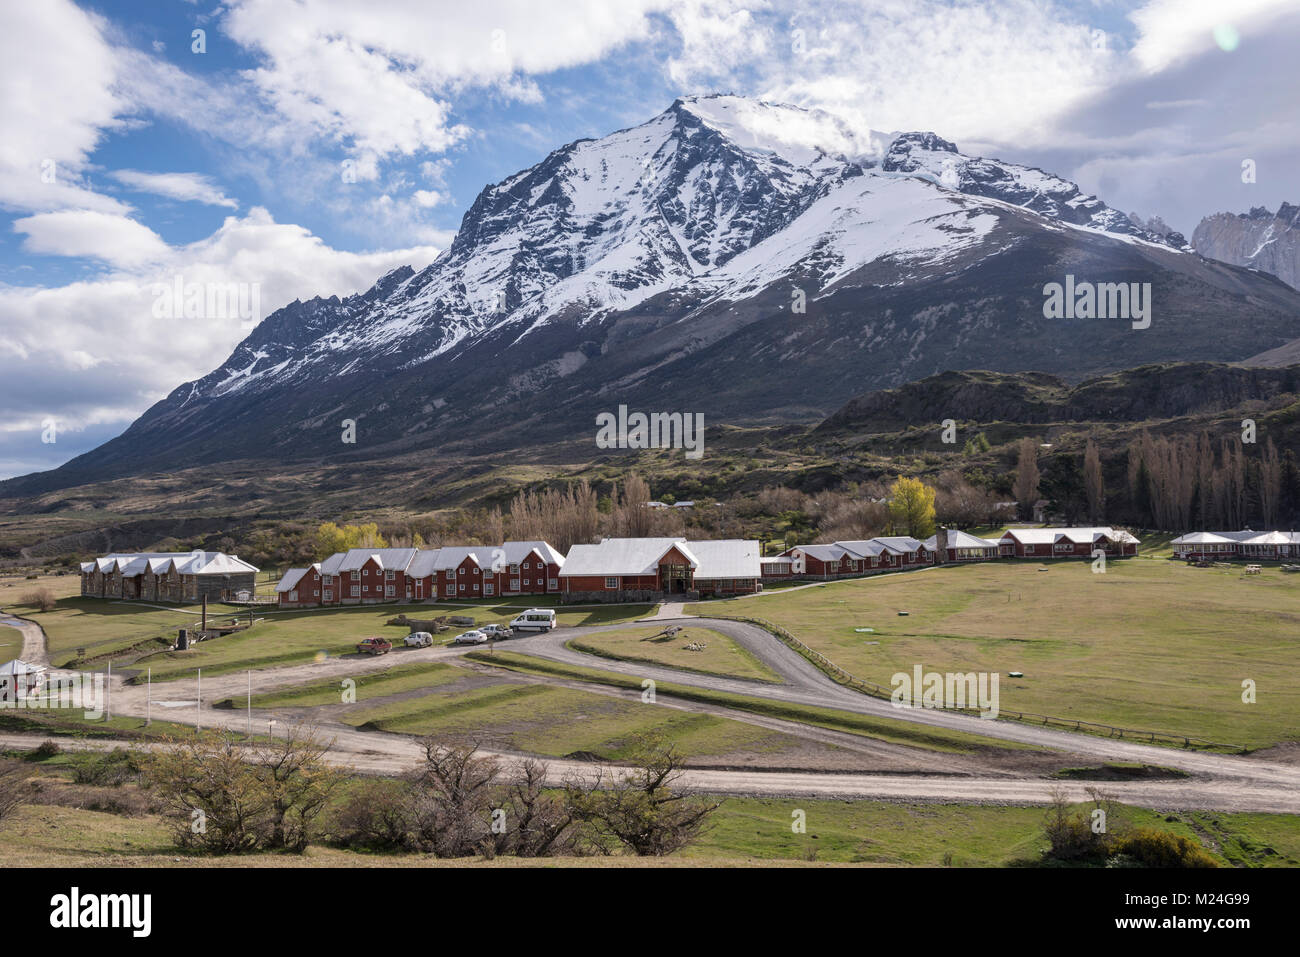 Hotel Las Torres in Torres del Paine National Park, Chile Stock Photo